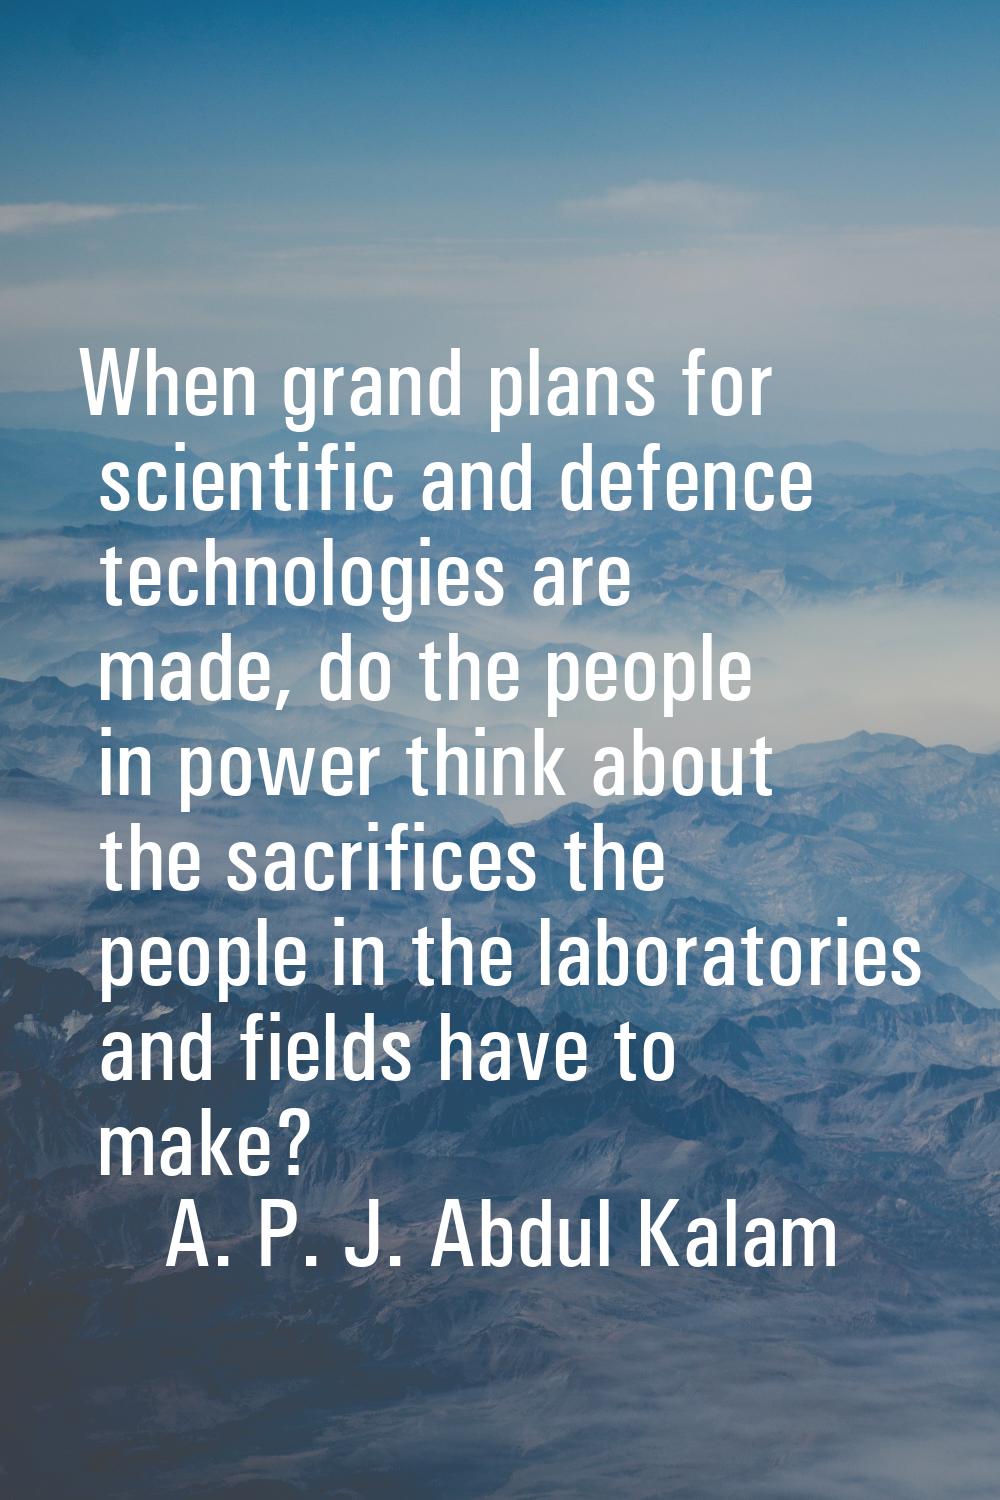 When grand plans for scientific and defence technologies are made, do the people in power think abo